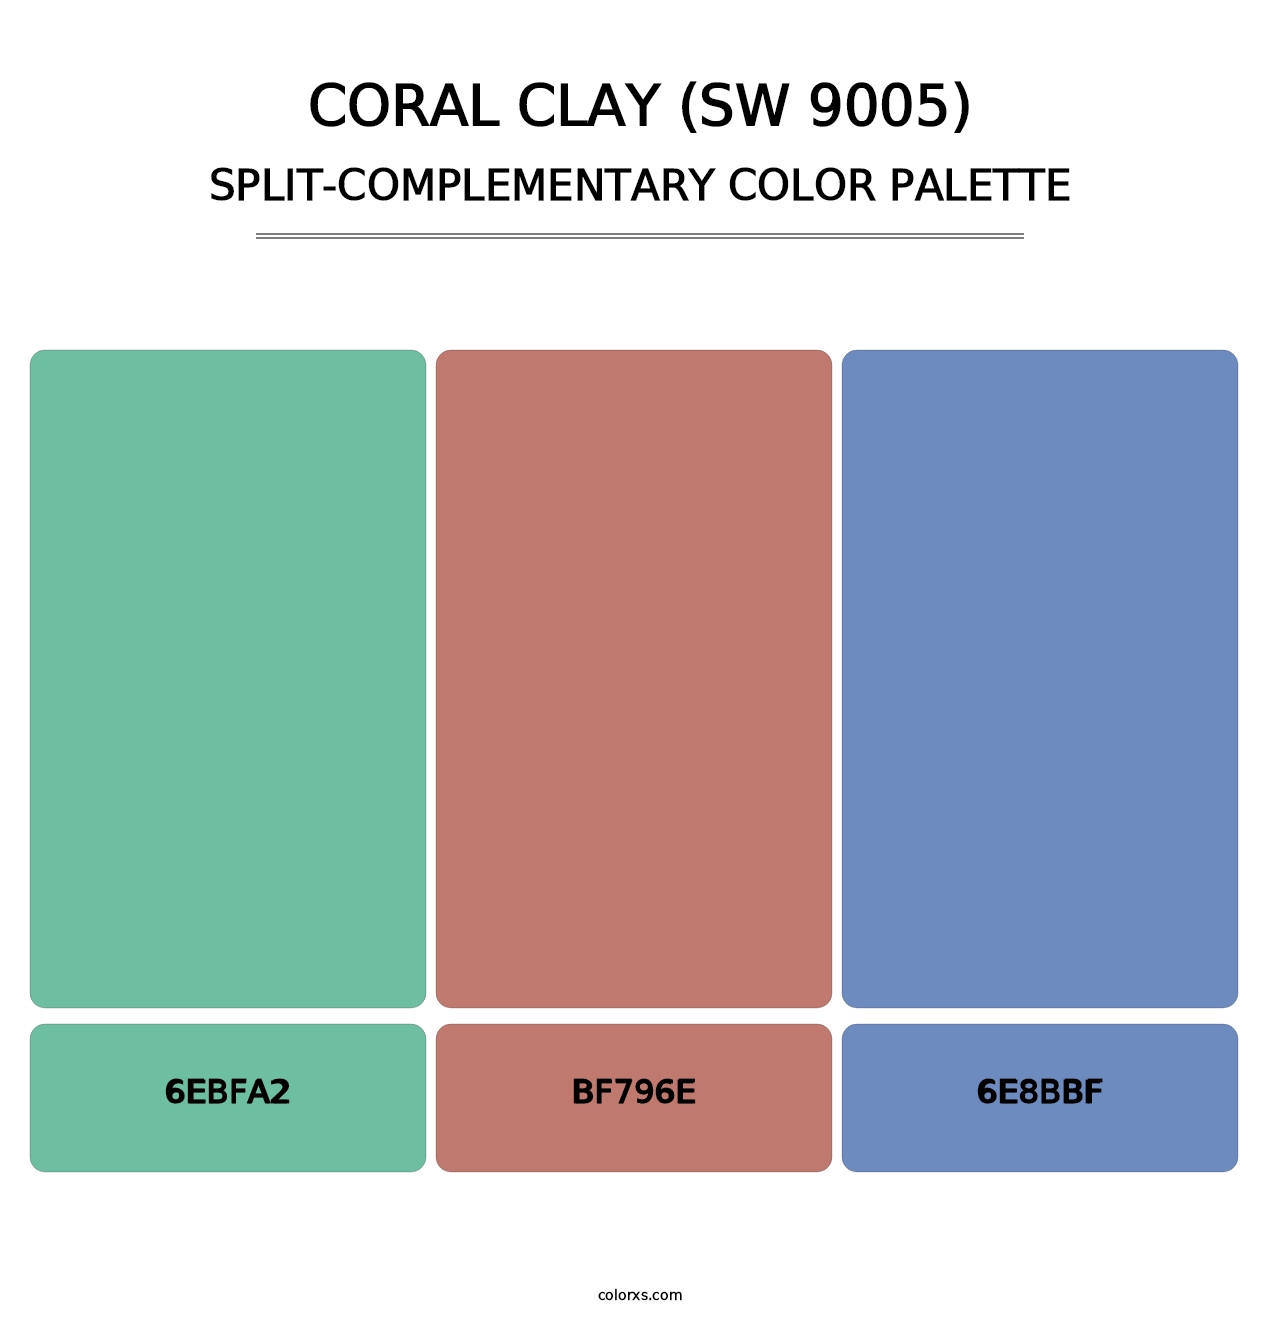 Coral Clay (SW 9005) - Split-Complementary Color Palette